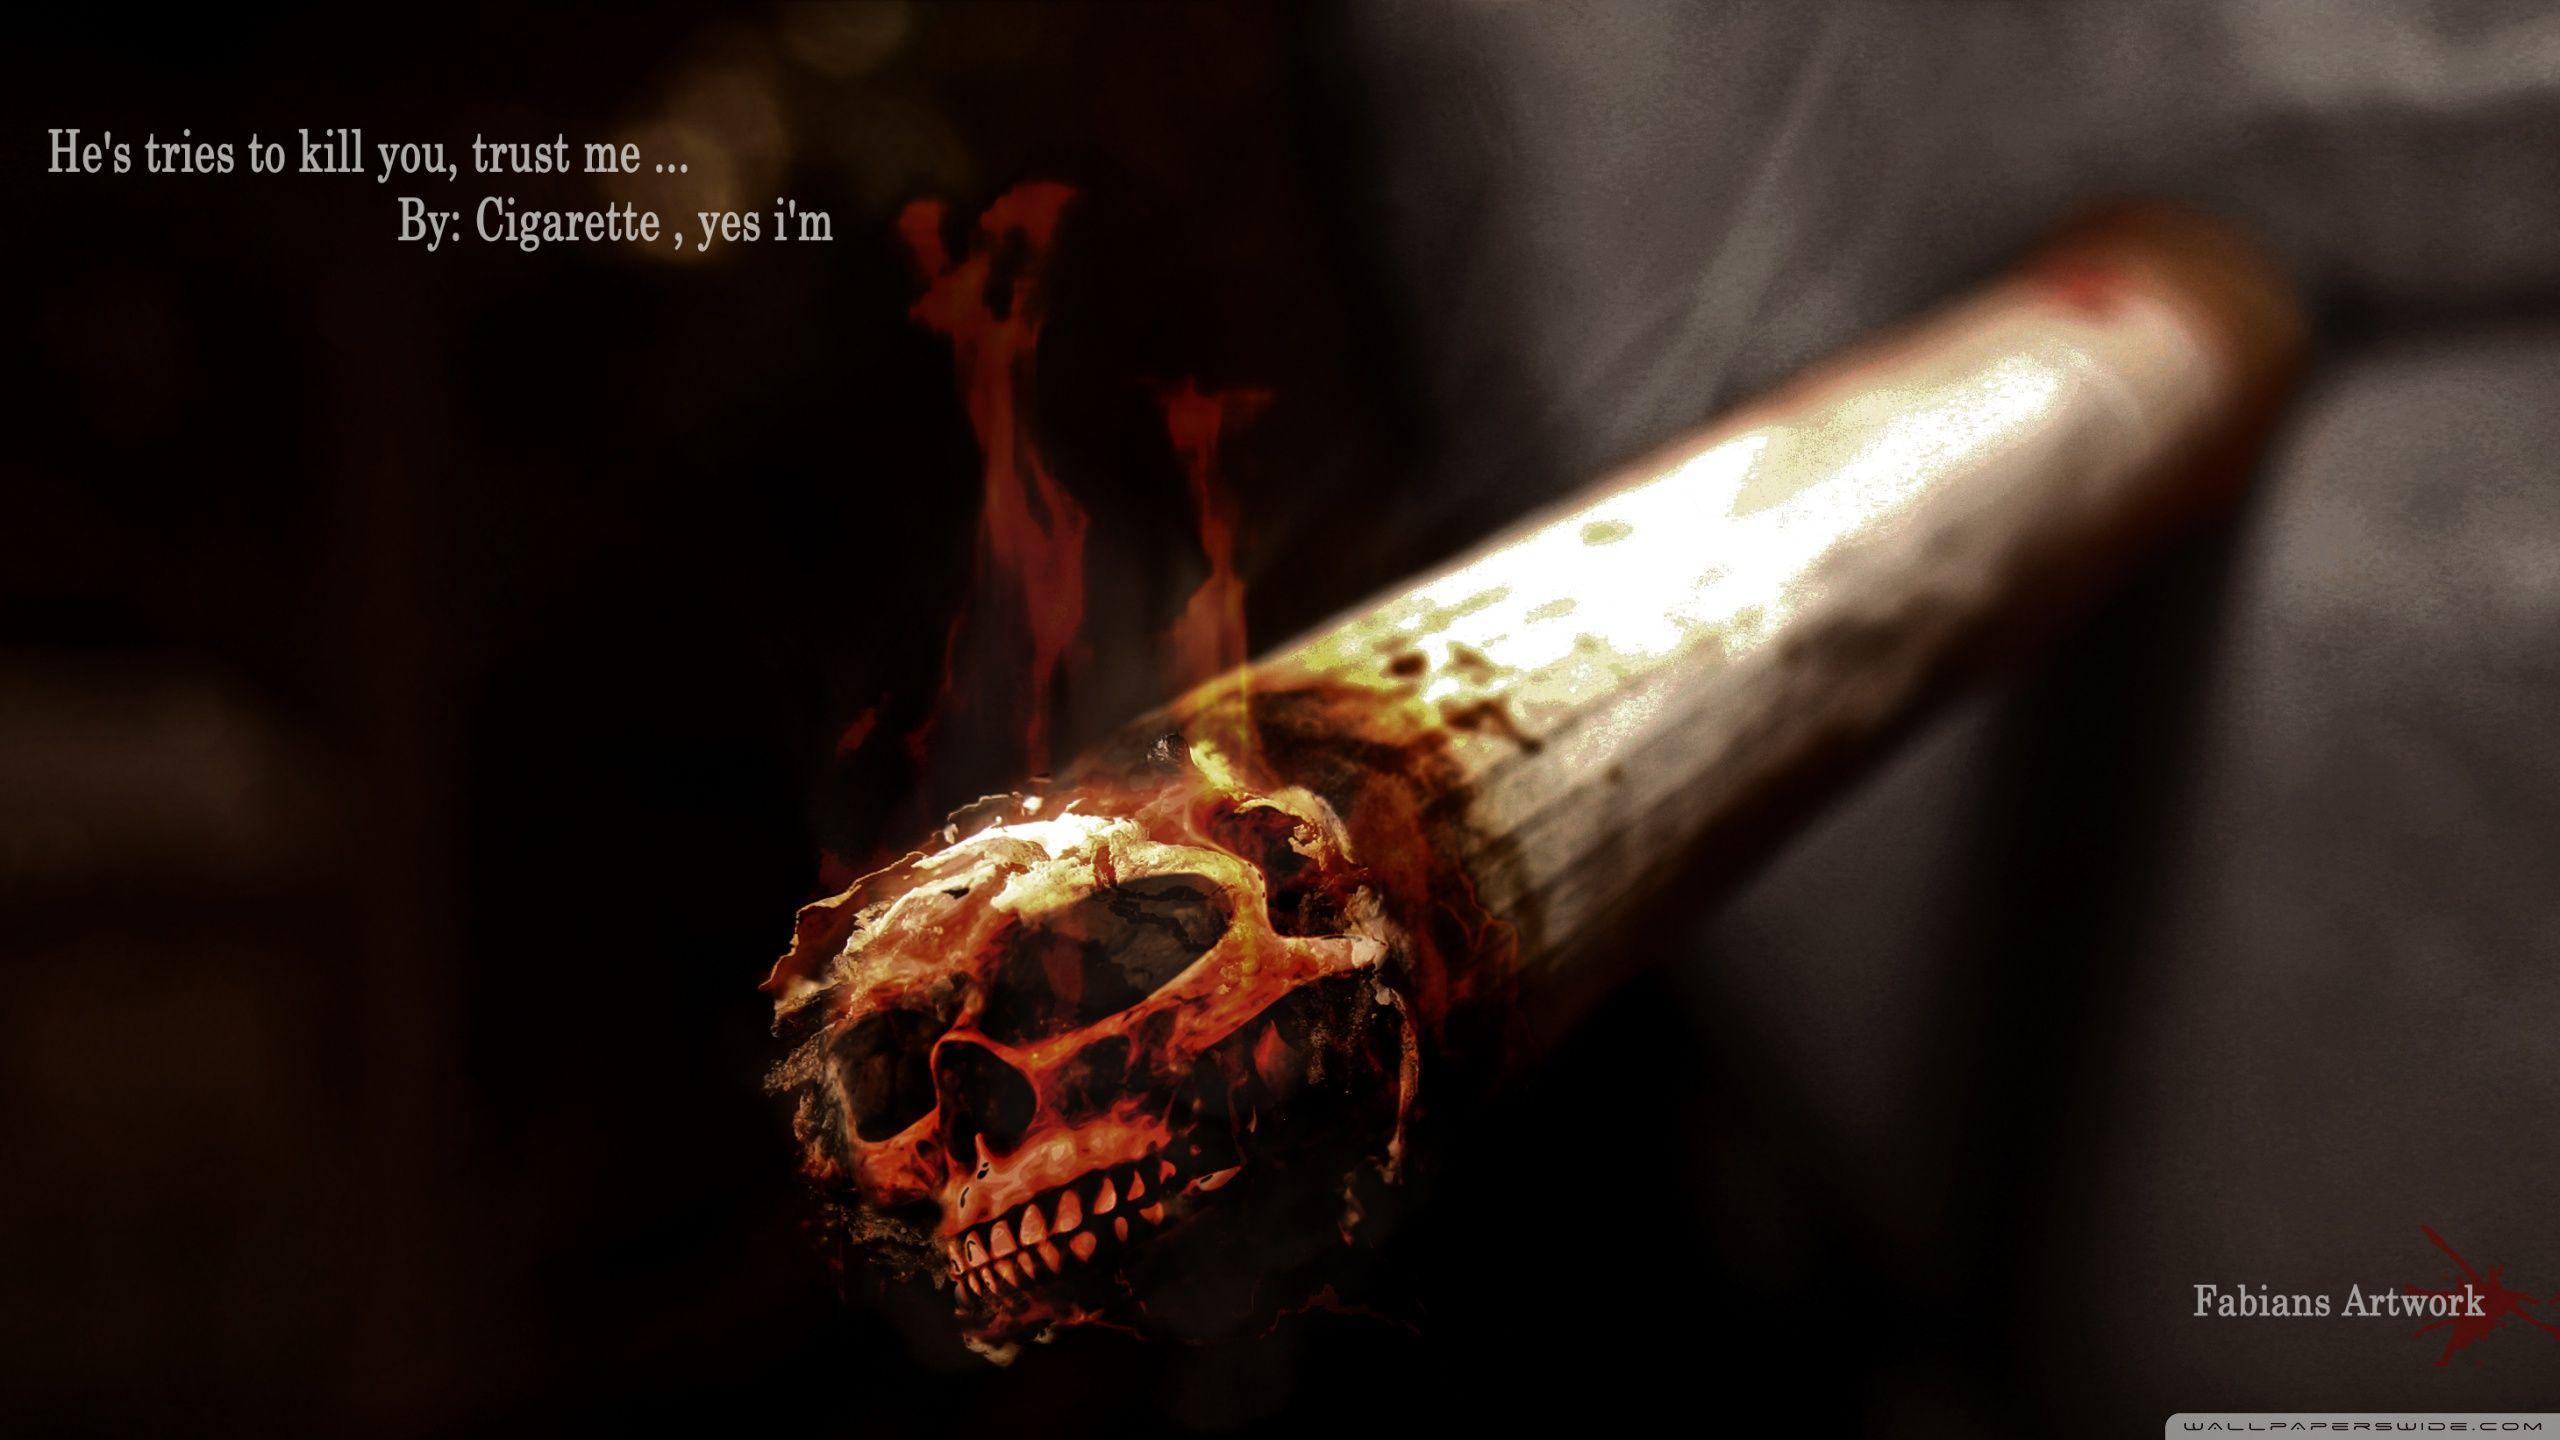 Wallpapers HD With Cigarette For PC - Wallpaper Cave